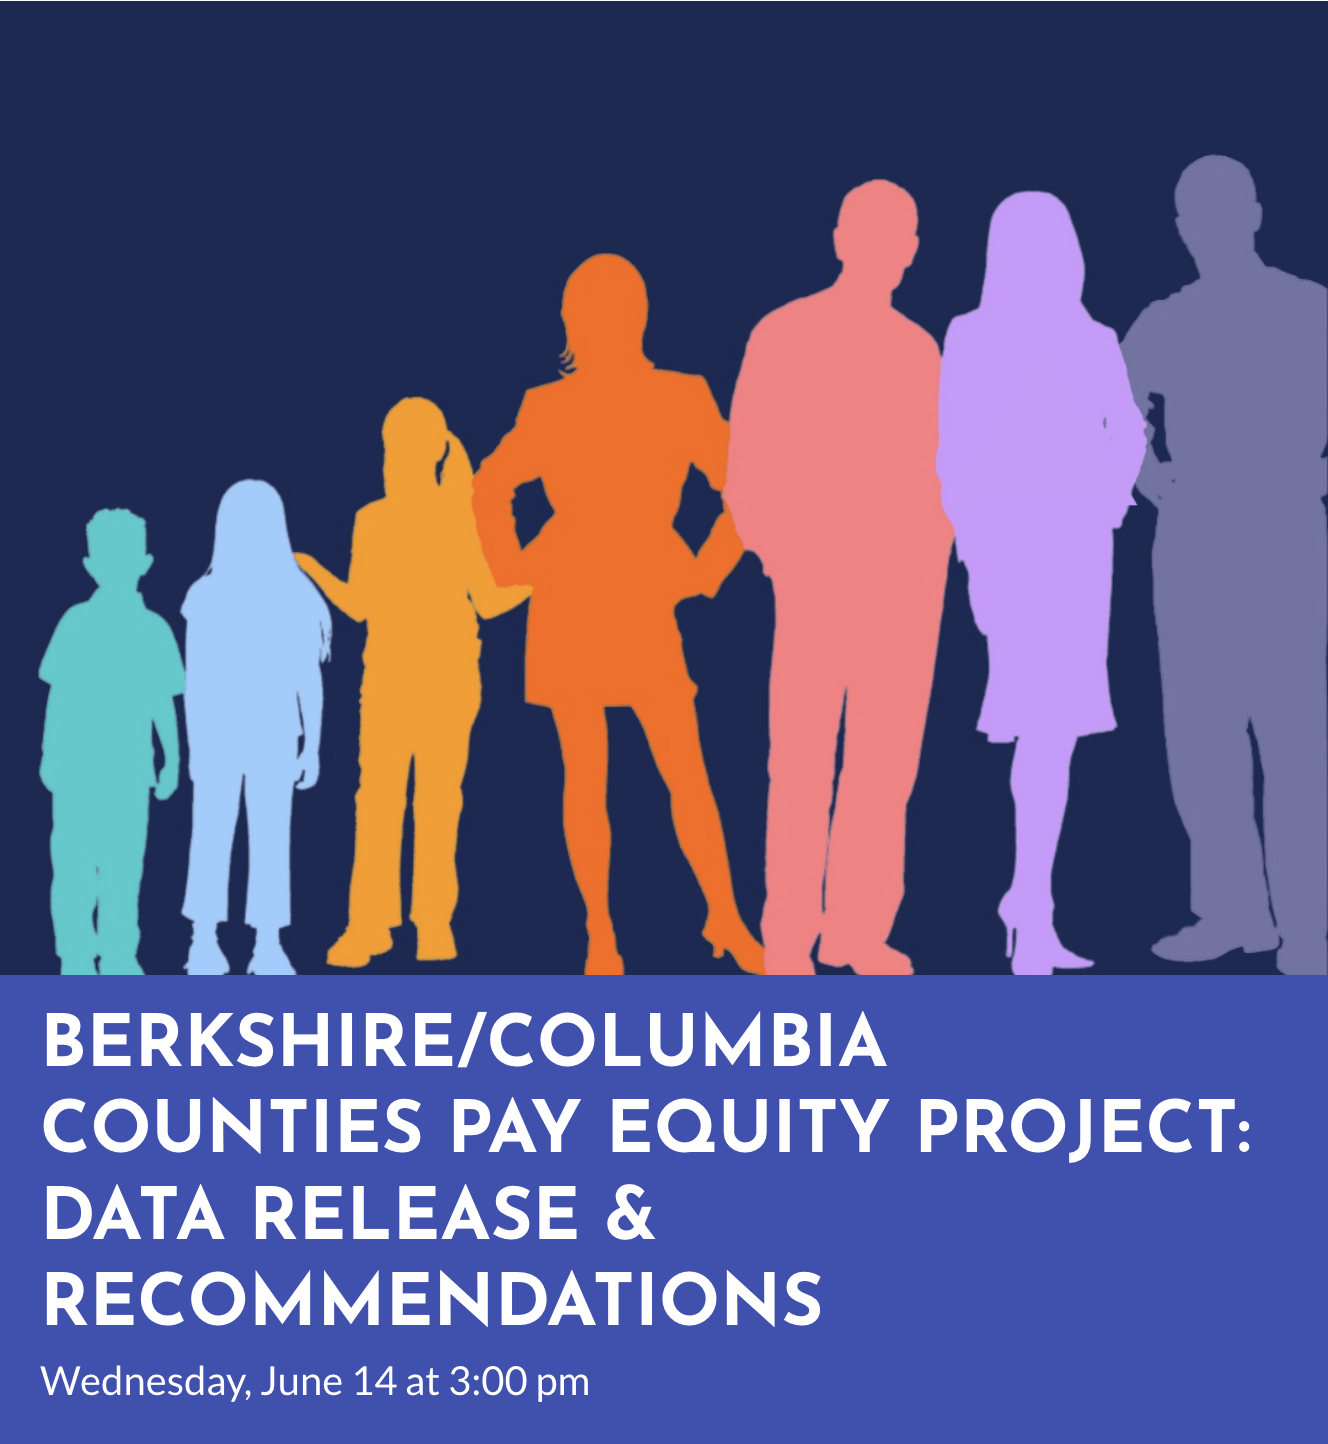 Berkshire/Columbia Counties Pay Equity Project: Data Release, Analysis & Recommendations